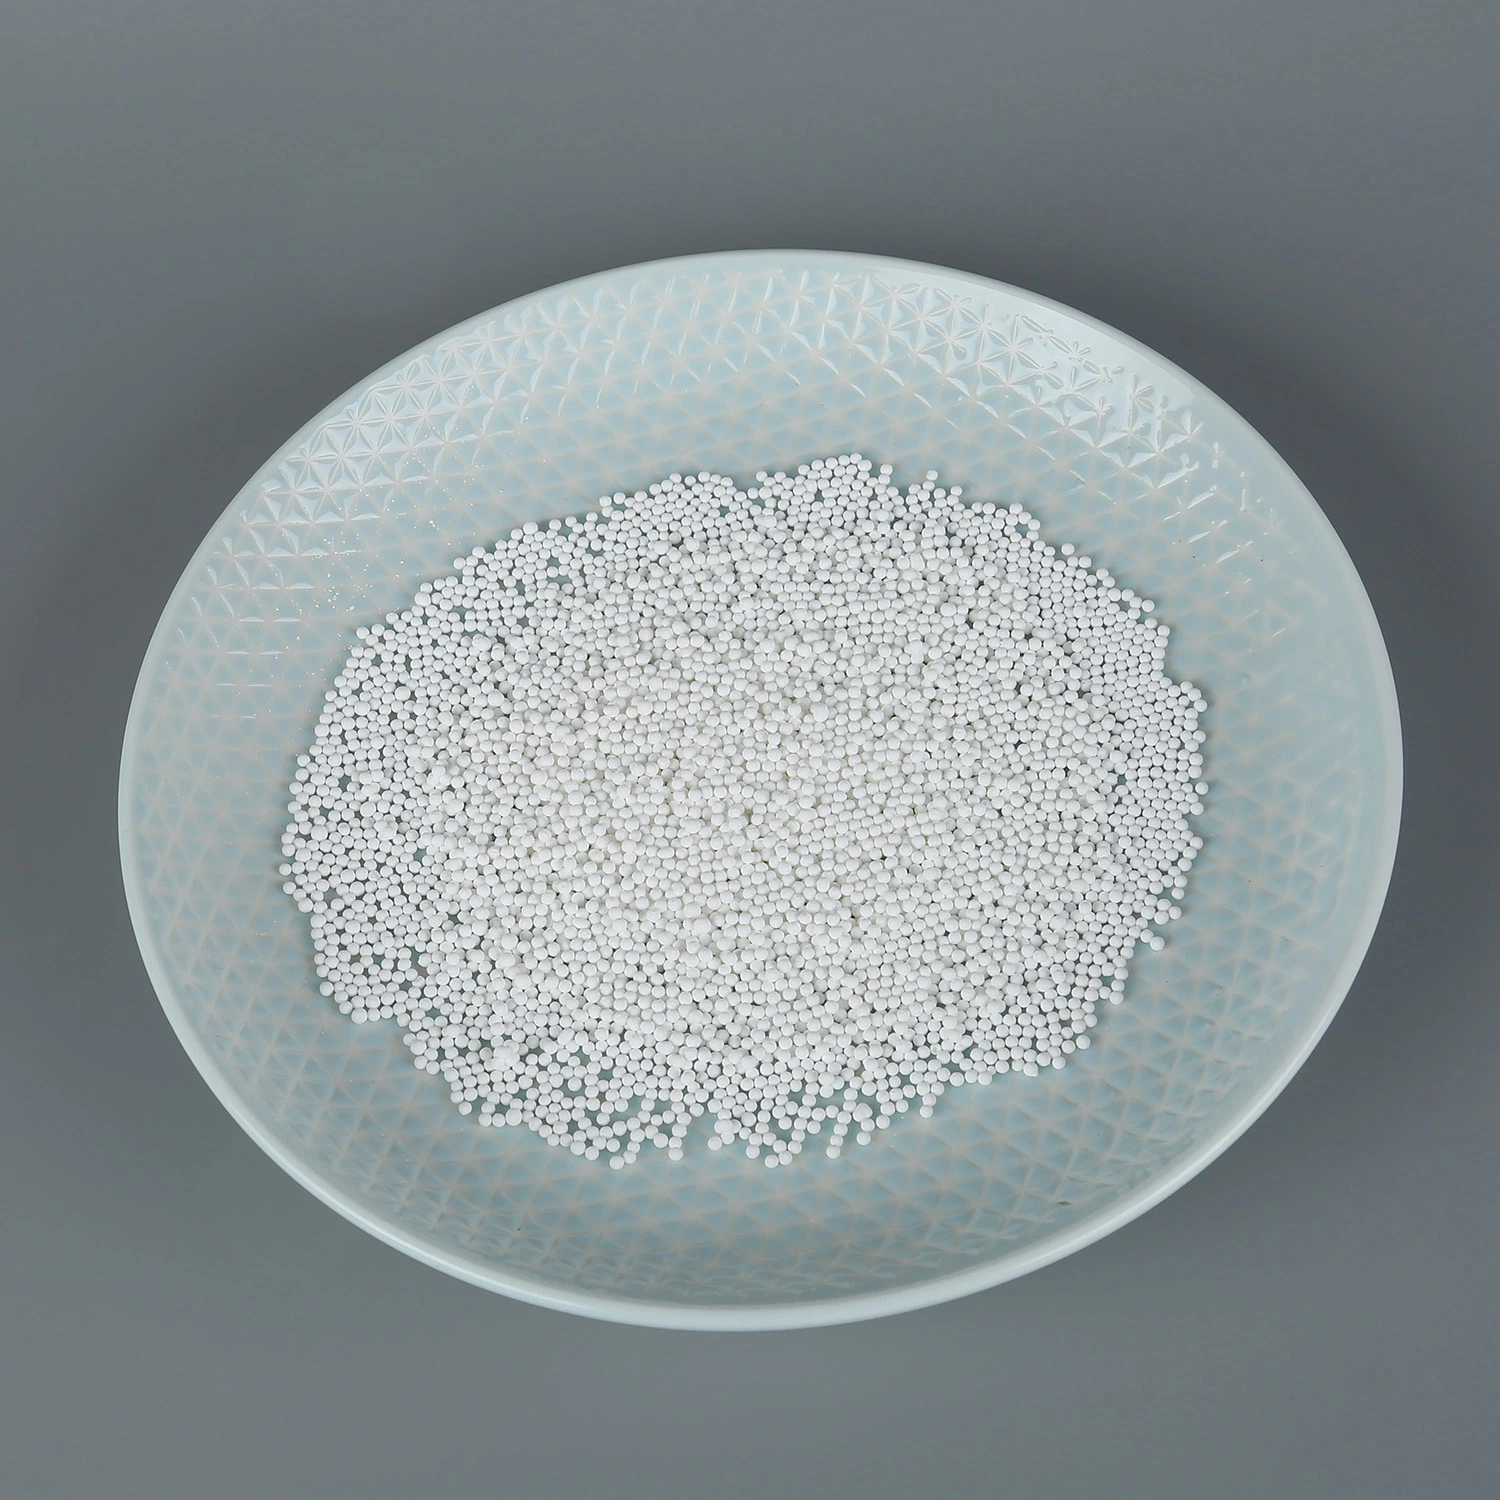 Activated Alumina Microsphere Carrier Absorbent Catalyst Carrier for Chemical Petrochemical Fertilizer Oil